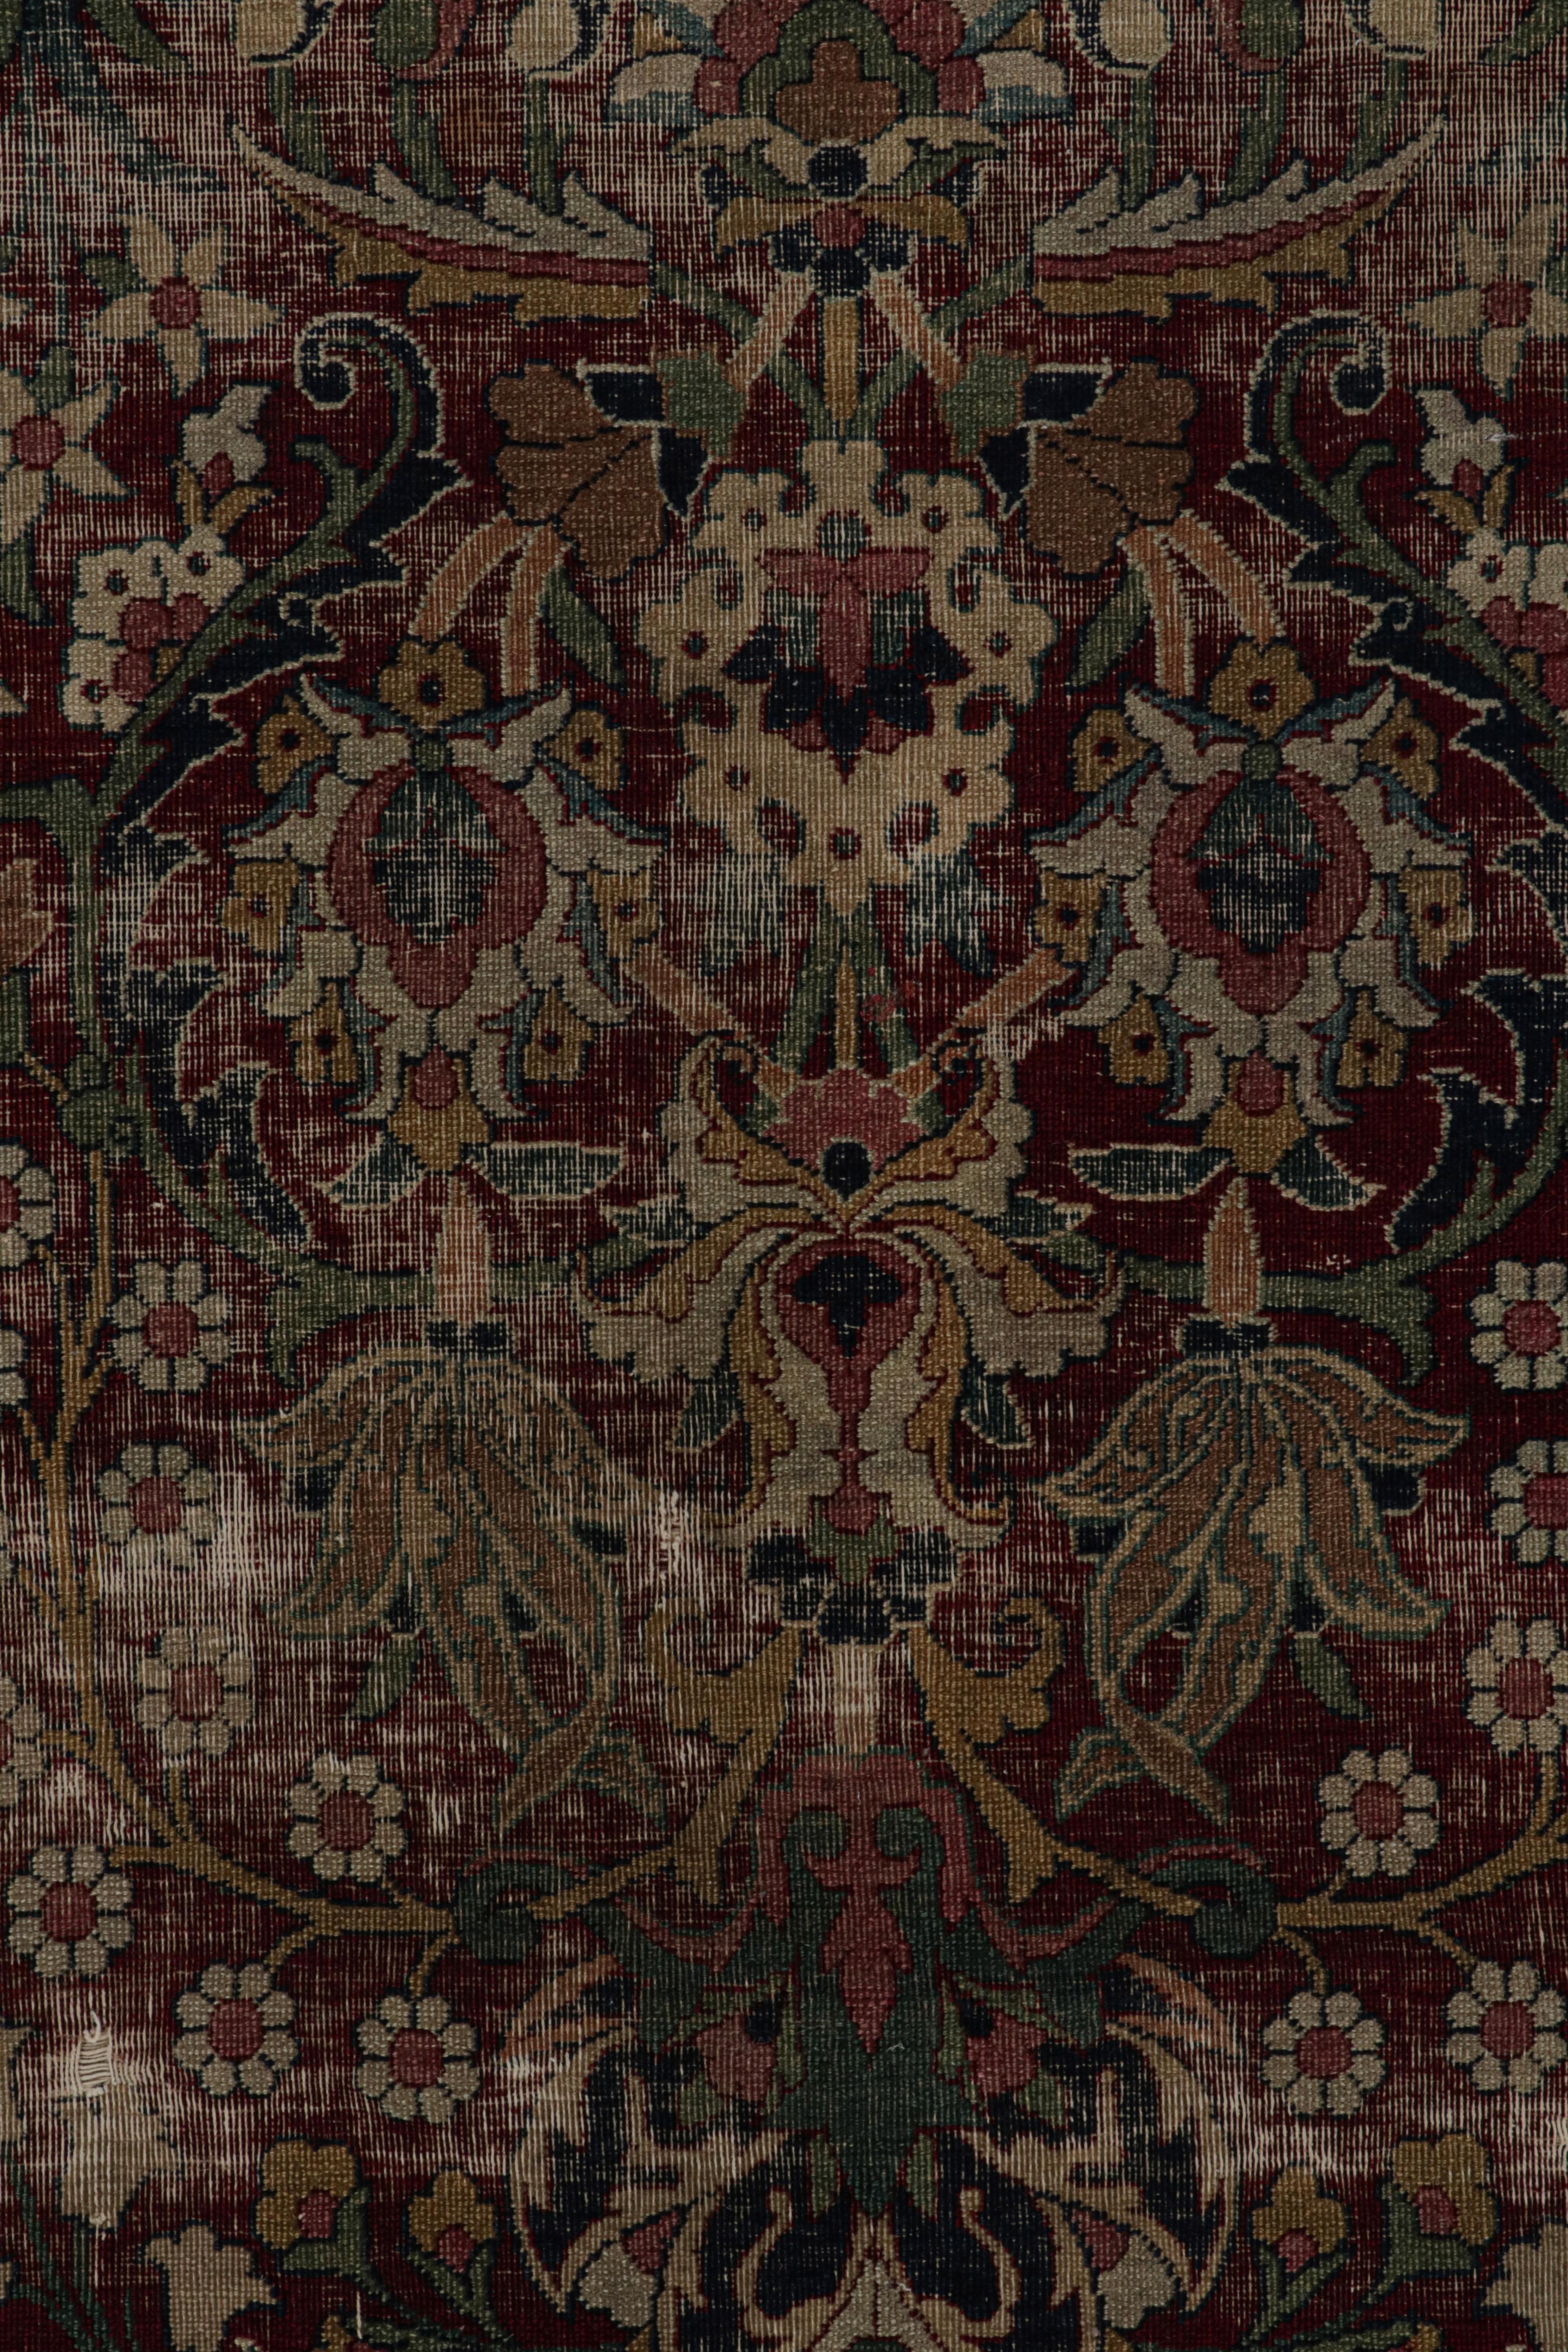 Late 19th Century Antique Persian Khorassan Rug in Burgundy with Floral Patterns, from Rug & Kilim For Sale